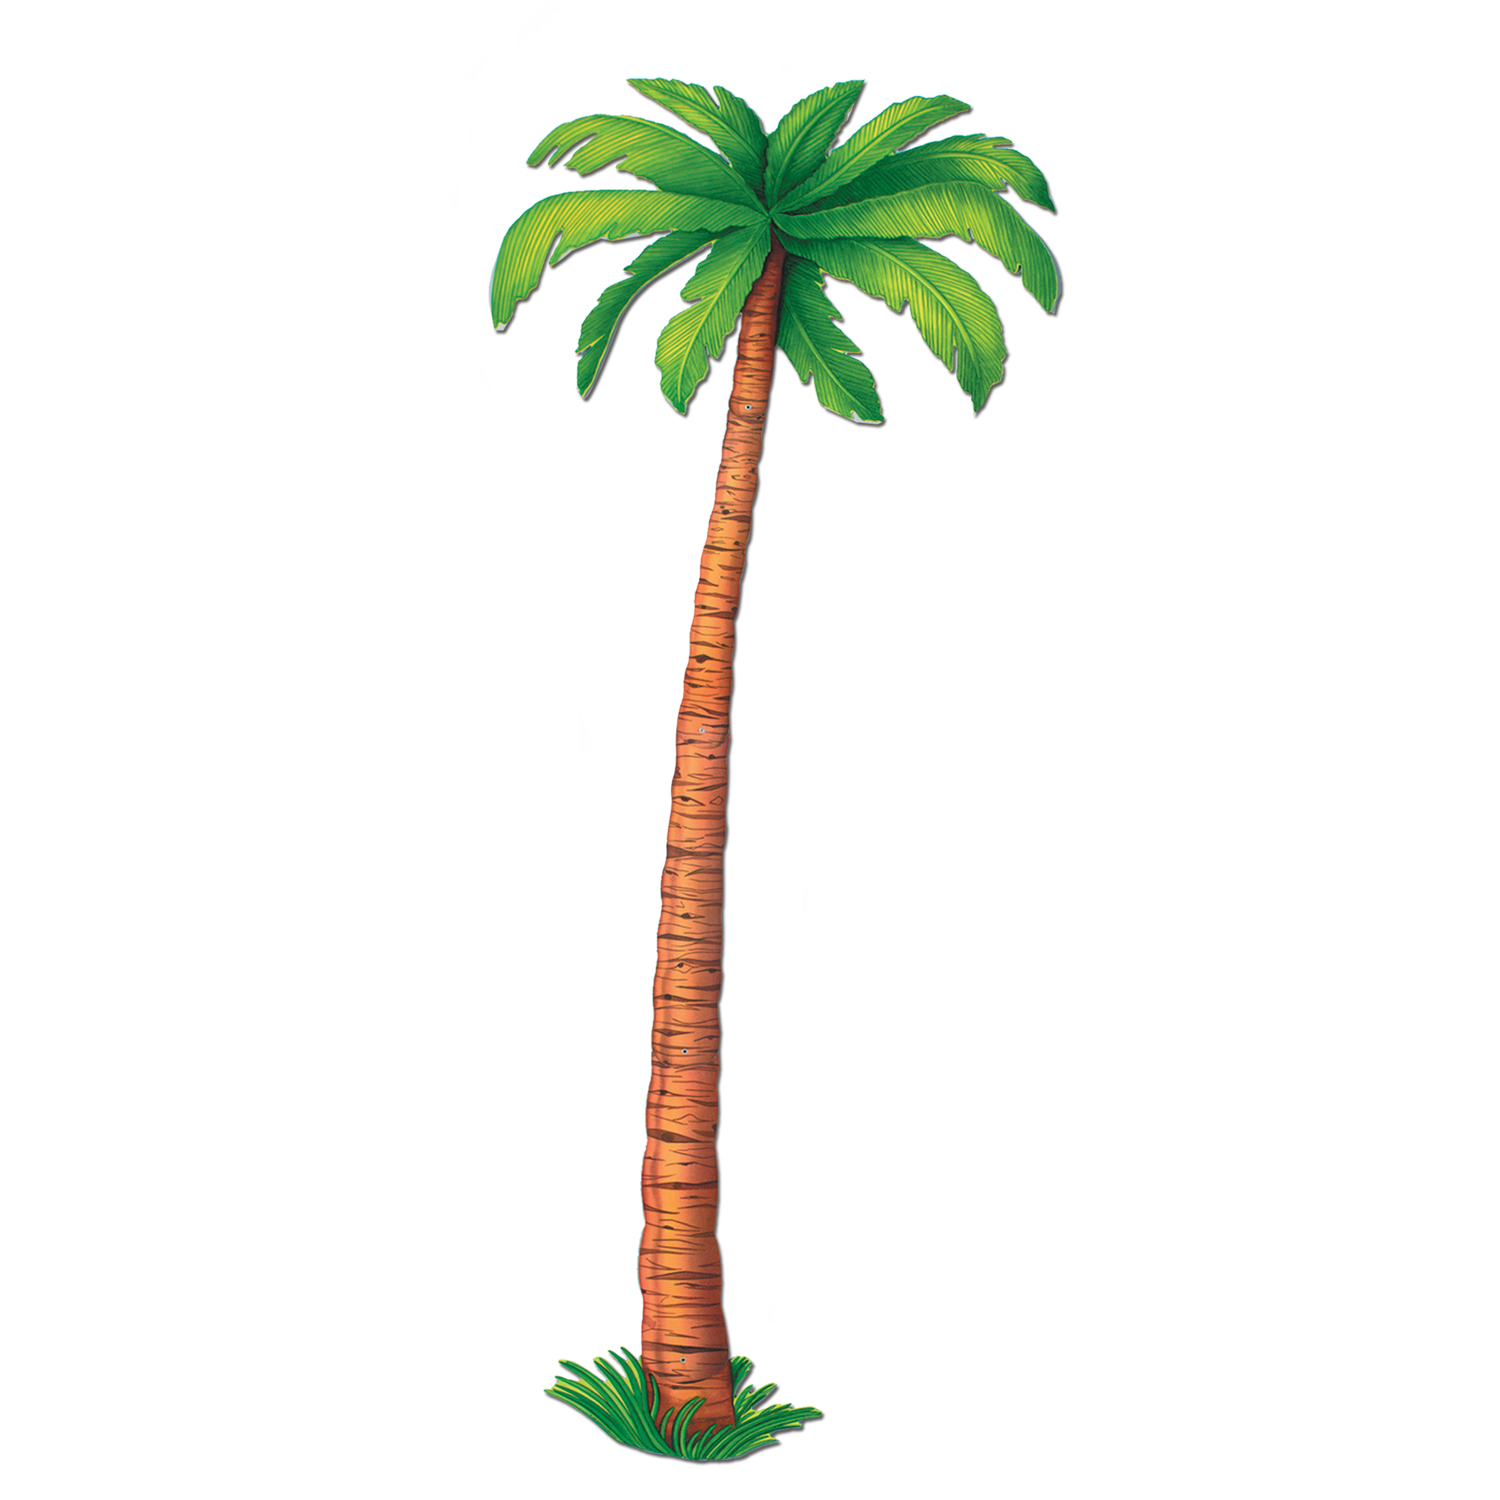 12 Wholesale Jointed Palm Tree